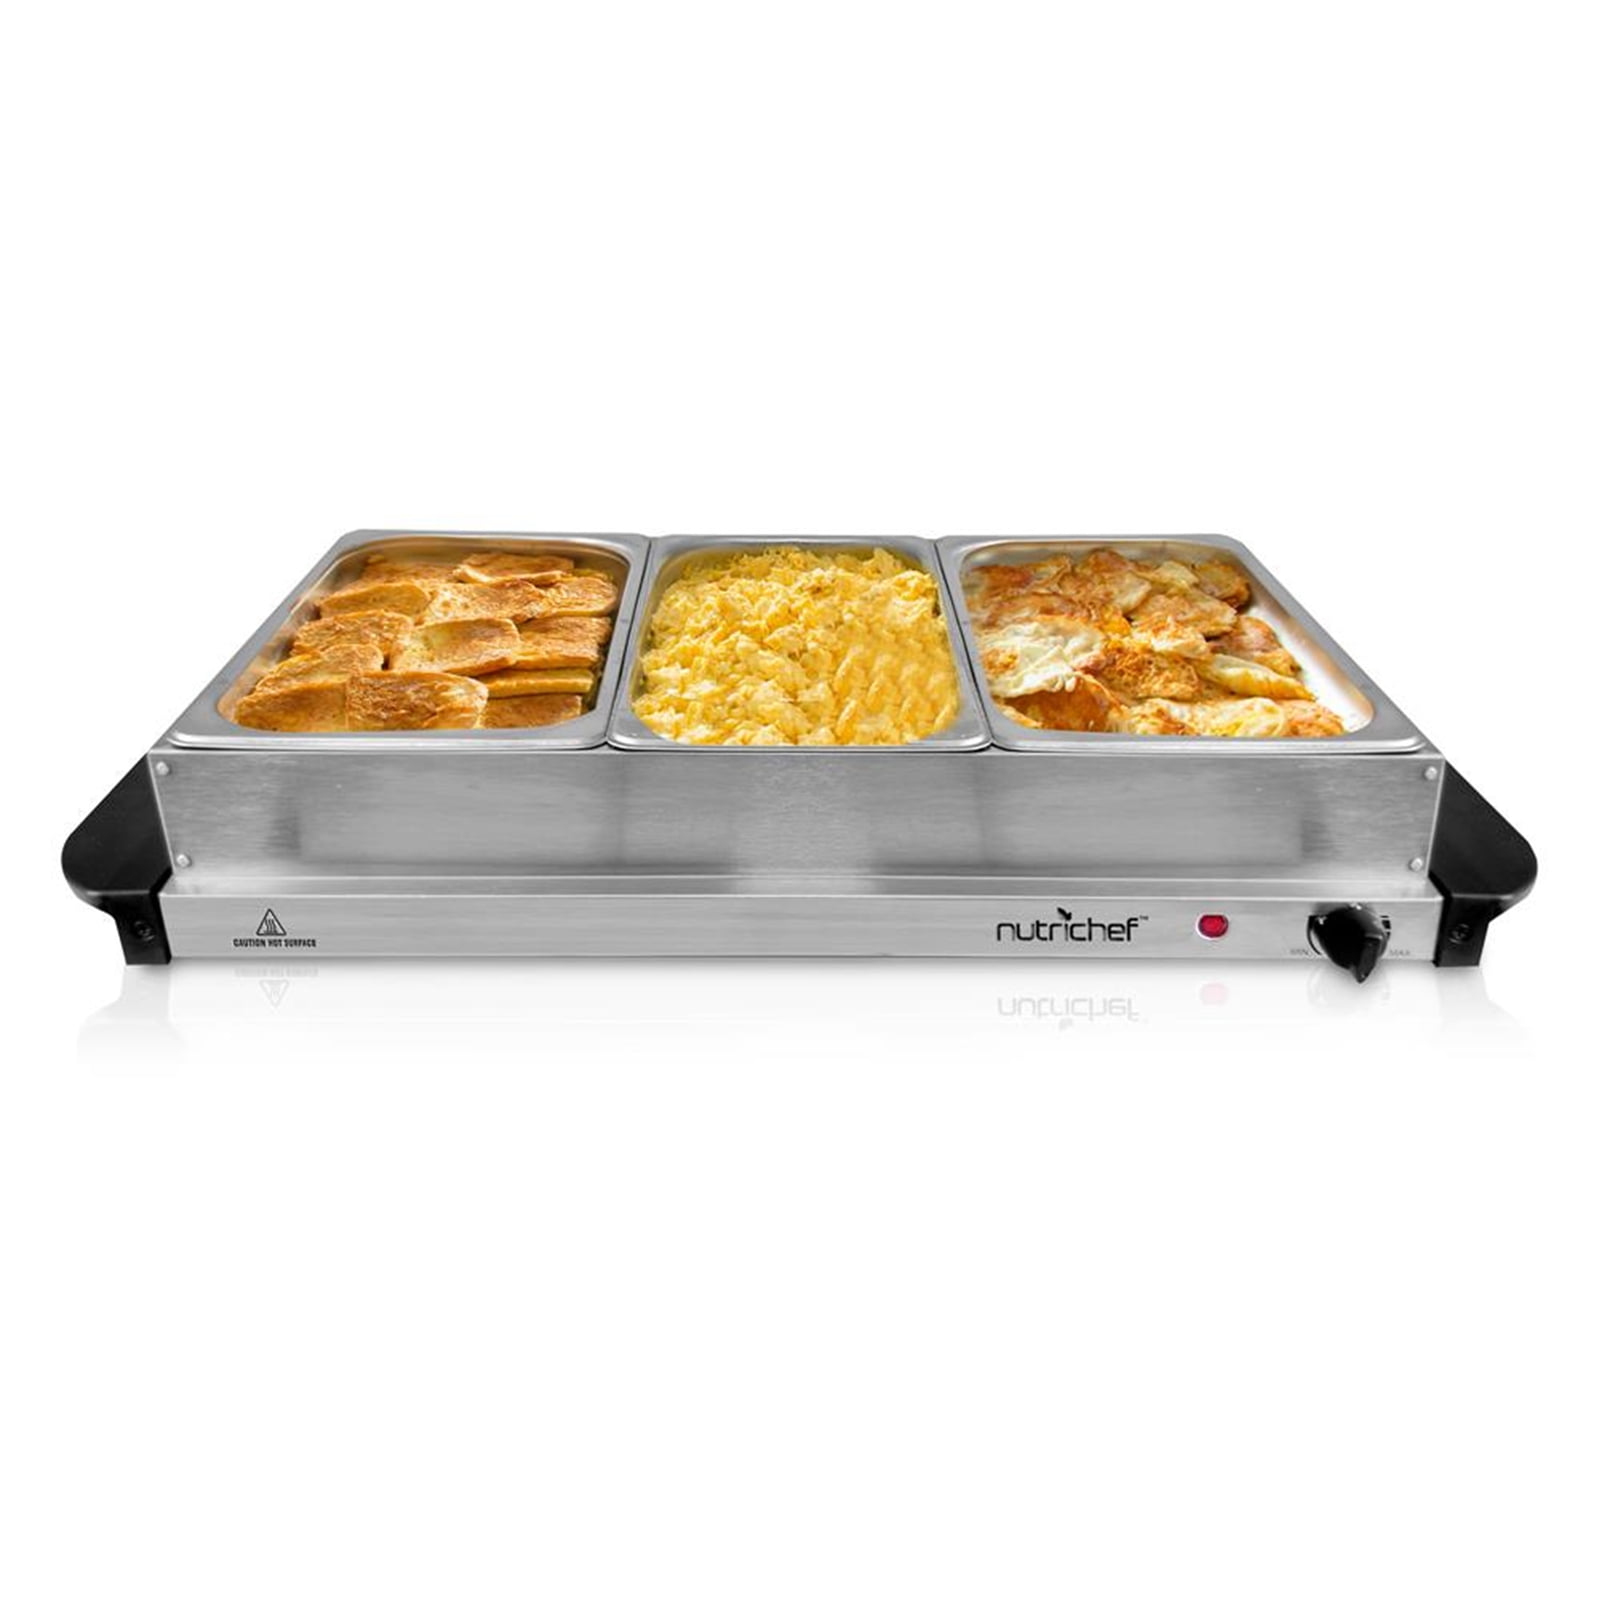  NutriChef 3 Tray Buffet Server & Hot Plate Food Warmer, Tabletop Electric Food Warming Tray, Easy Clean Stainless Steel, Portable  & Great for Parties & Events